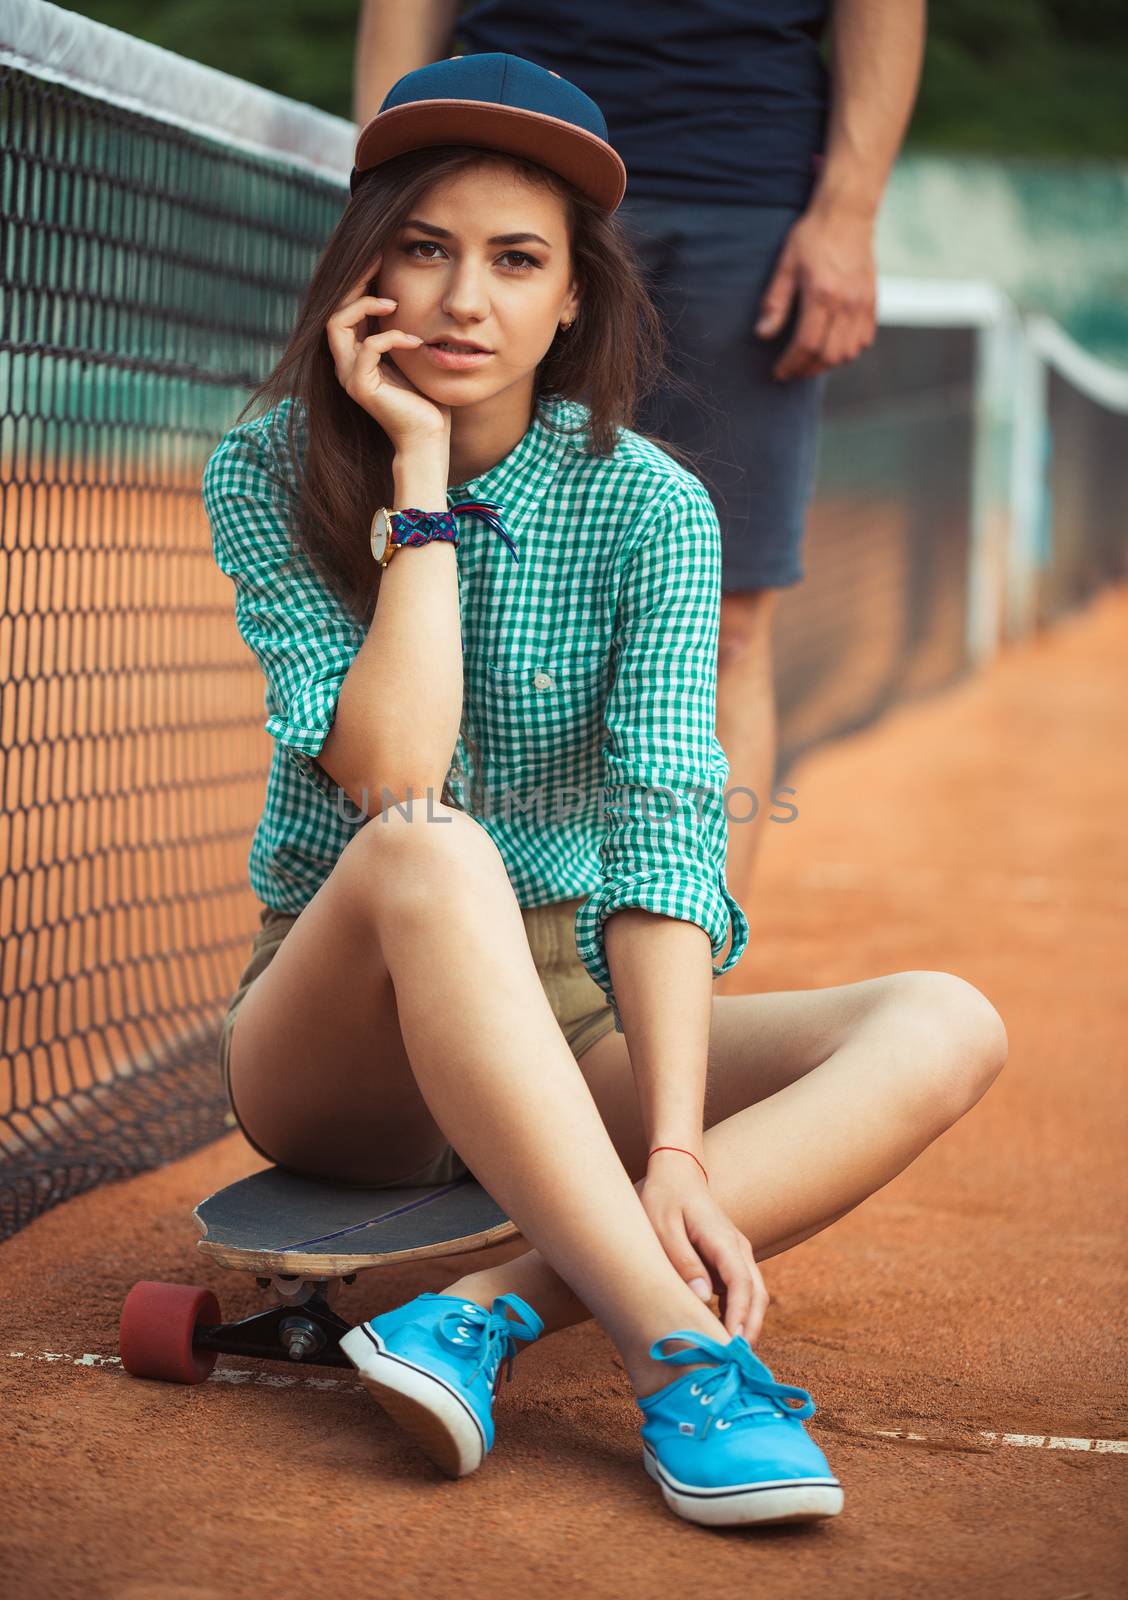 Young beautiful girl sitting on a skateboard on the tennis court